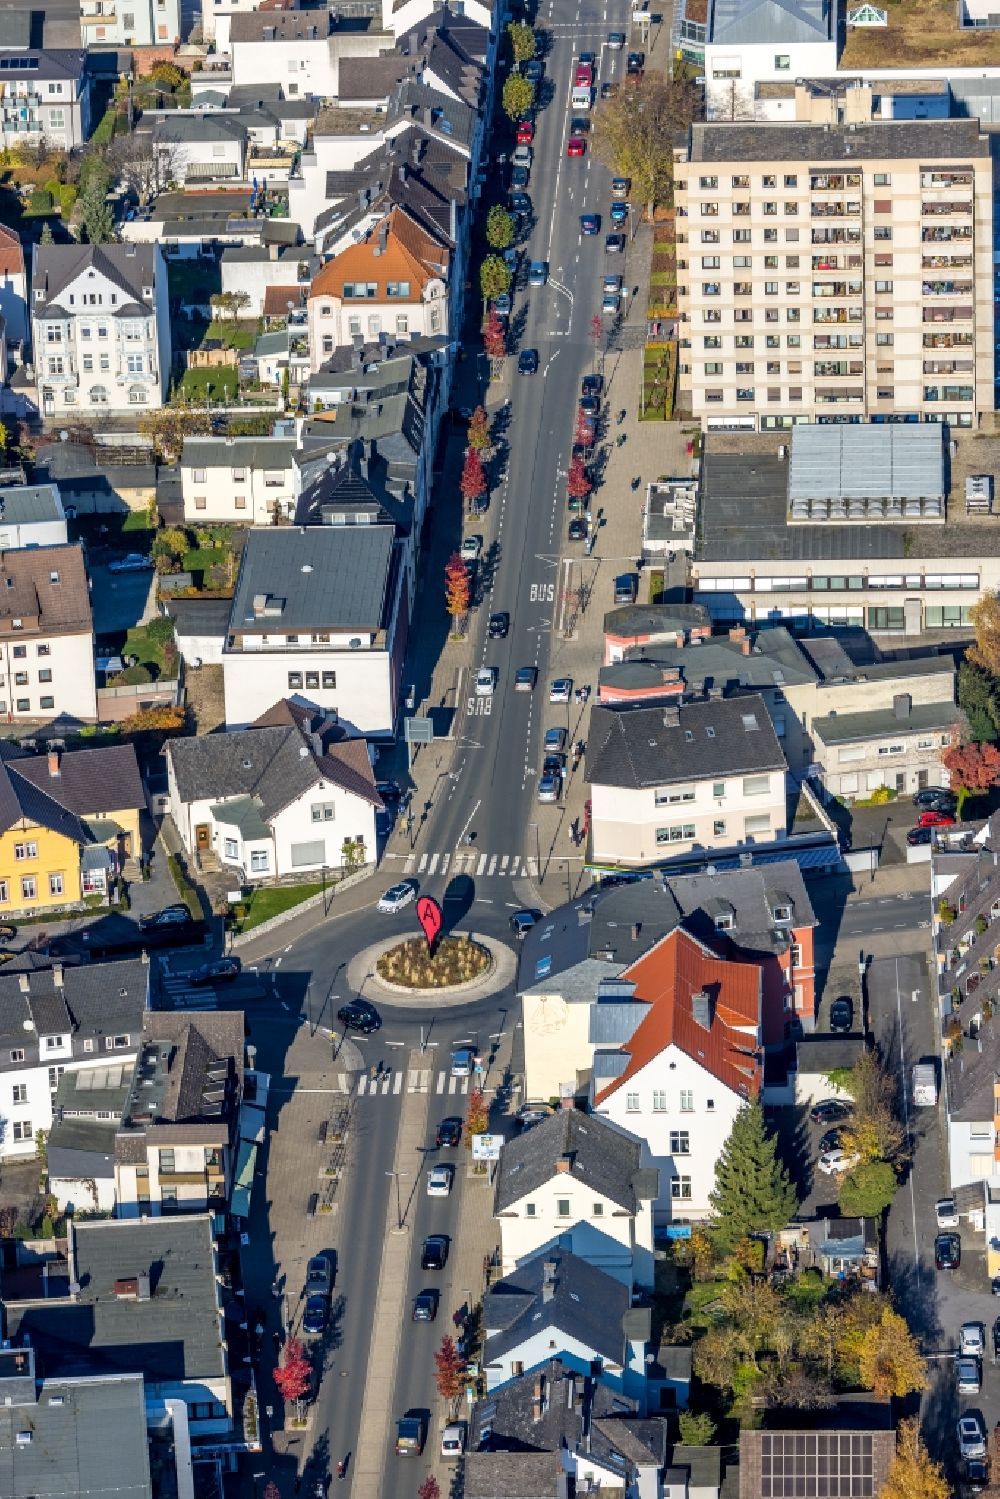 Aerial image Arnsberg - Traffic management of the roundabout road of Clemens-August-Strasse and of Rumbecker Strasse in the district Wennigloh in Arnsberg in the state North Rhine-Westphalia, Germany